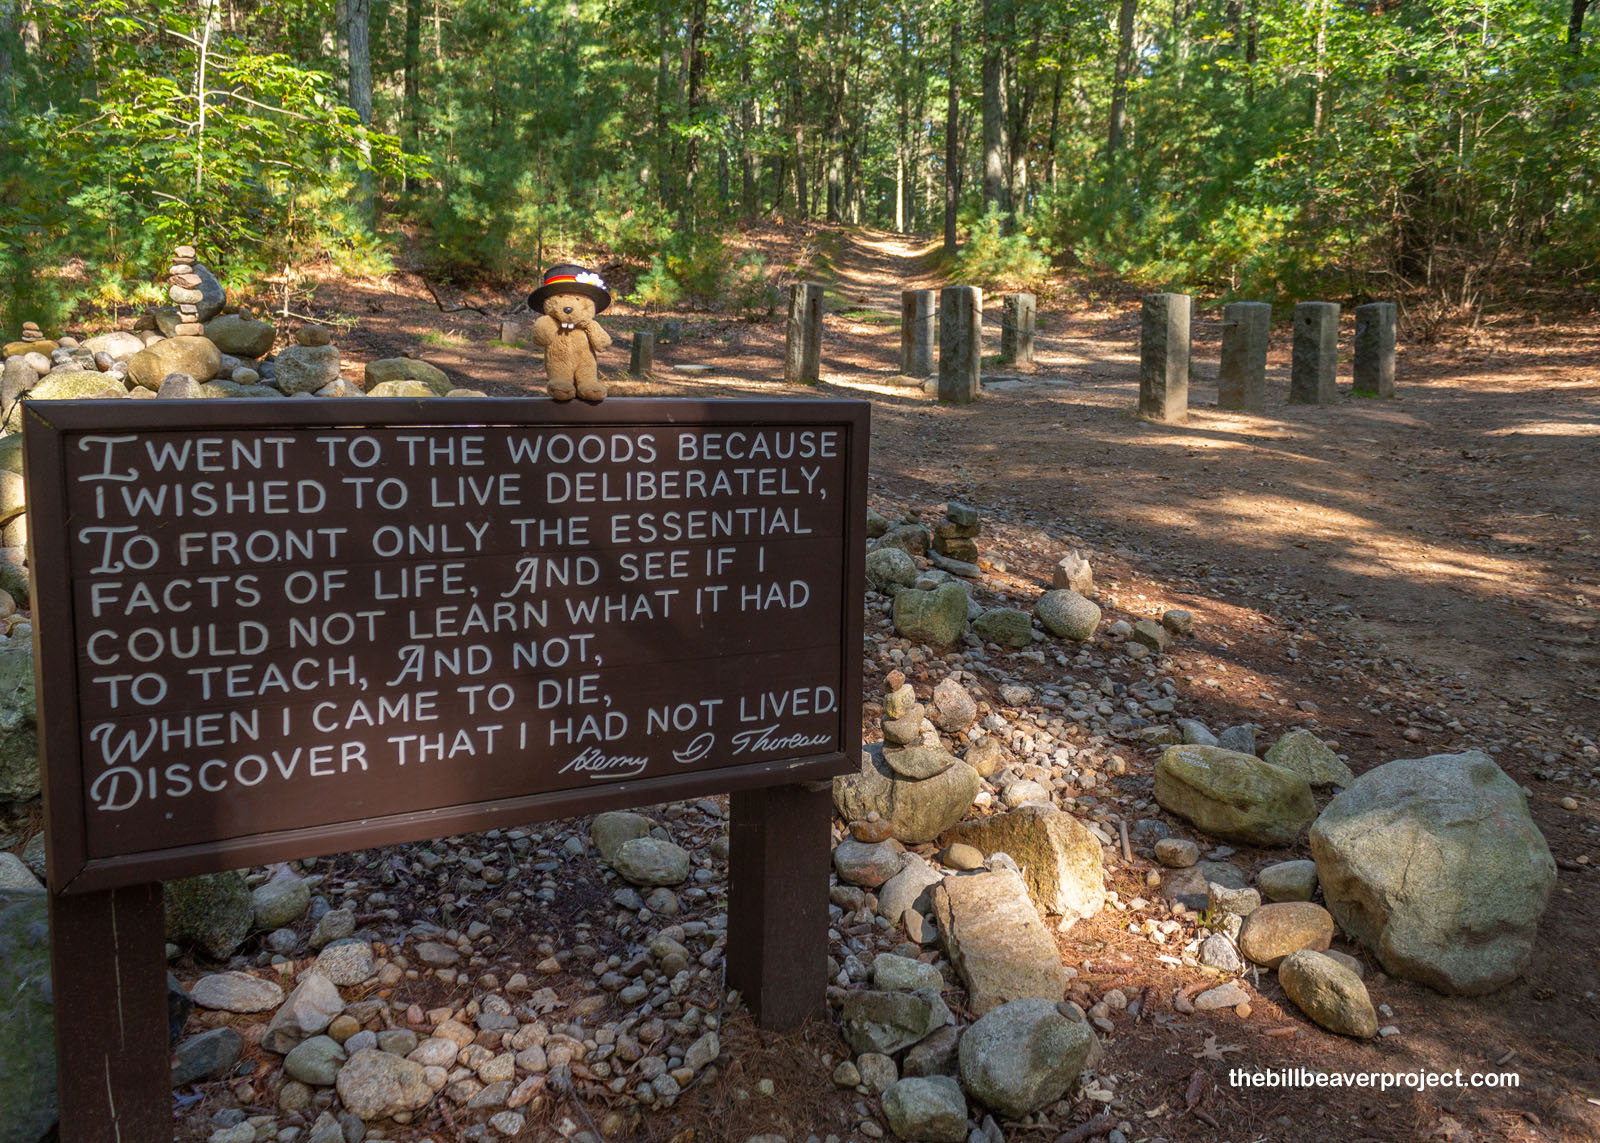 The cairn at the site of Thoreau's cabin!